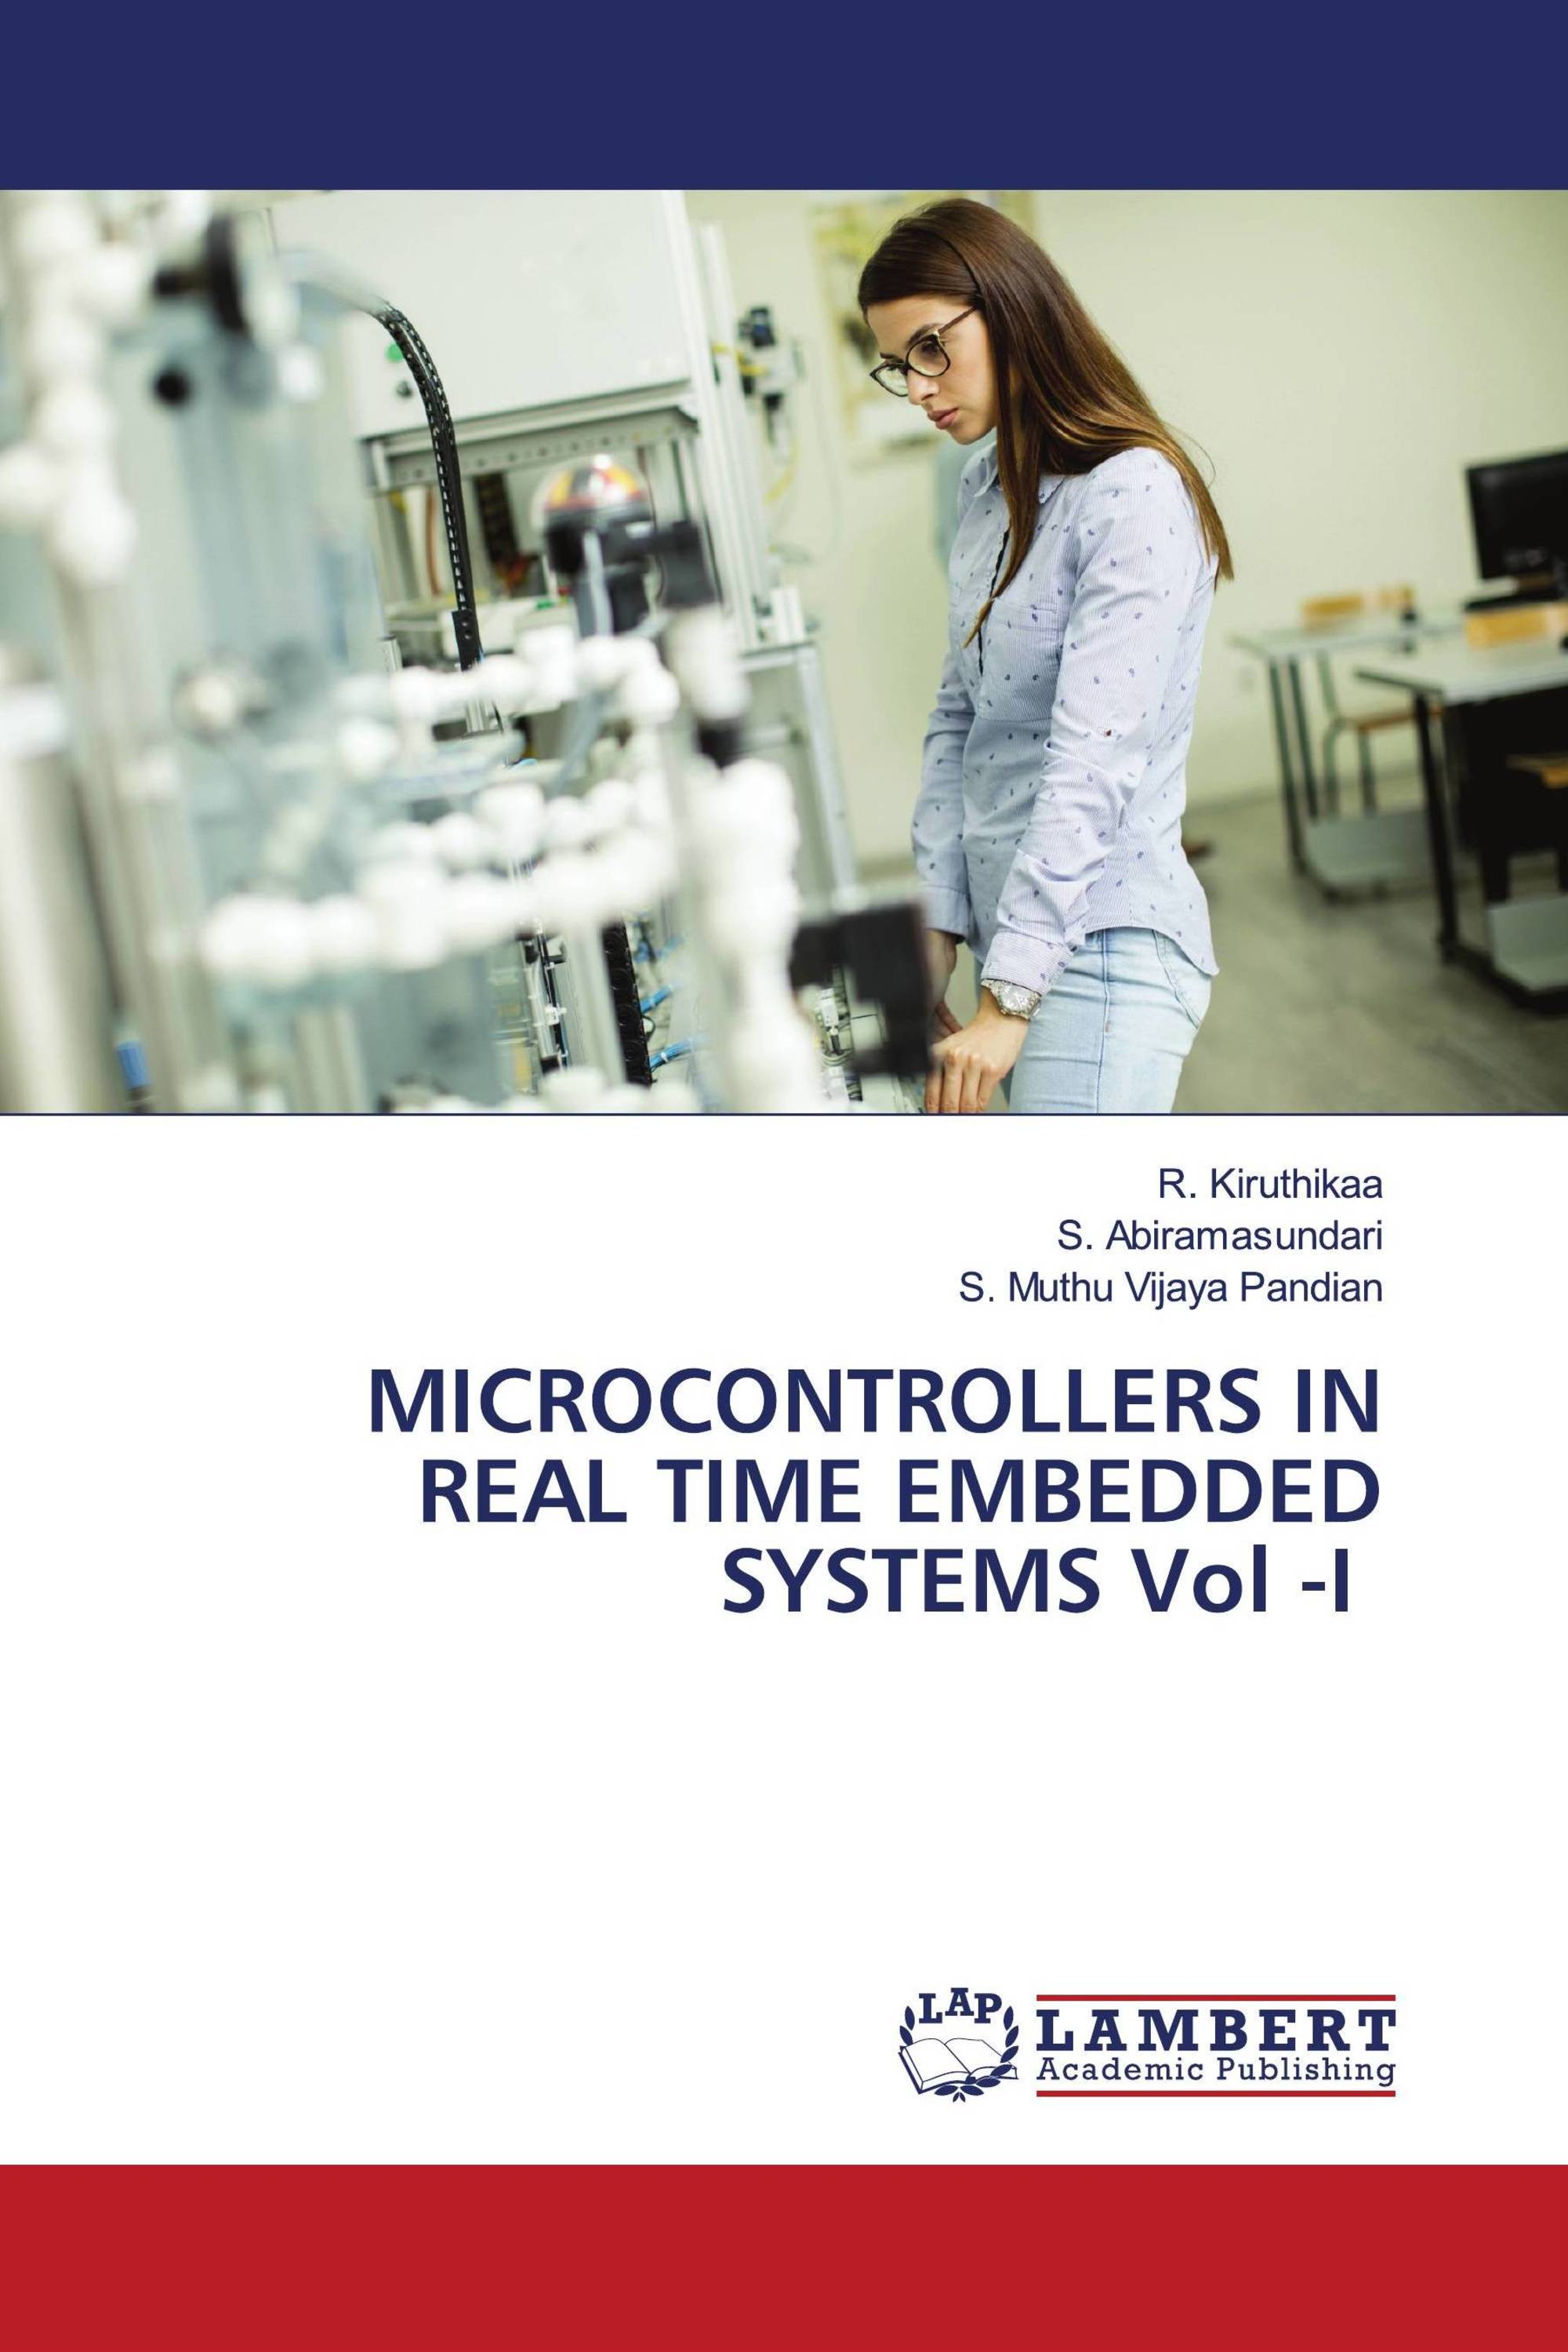 MICROCONTROLLERS IN REAL TIME EMBEDDED SYSTEMS Vol -I